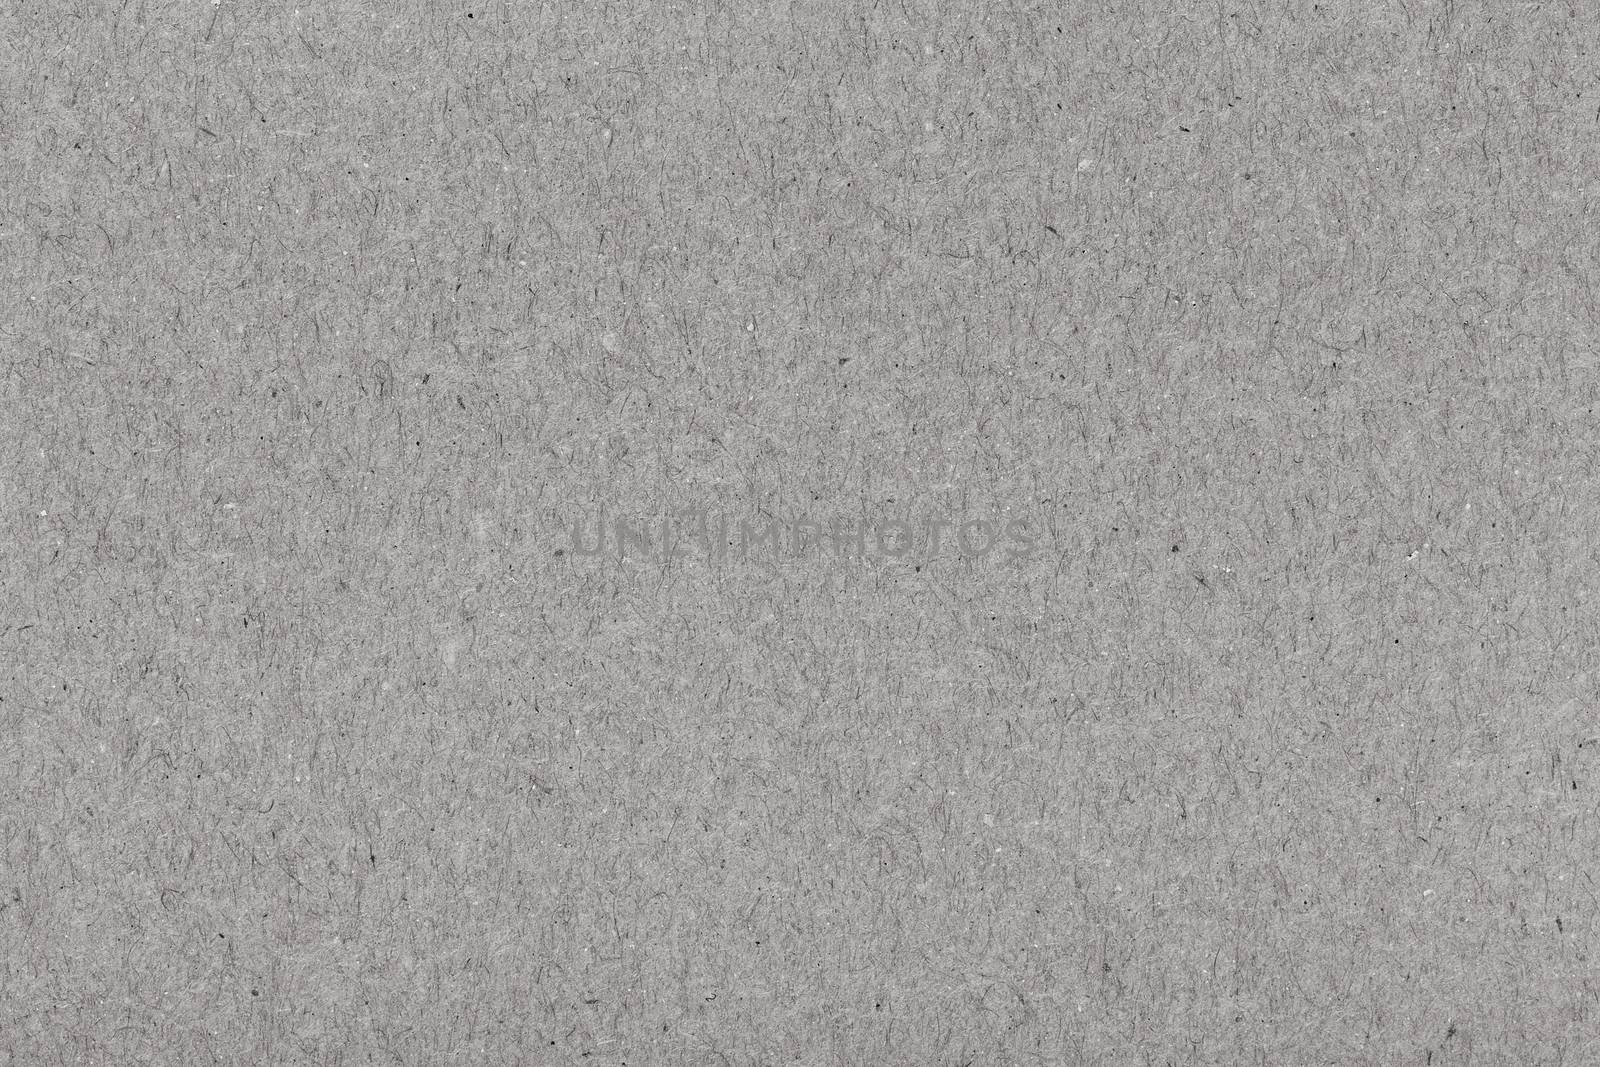 Natural gray recycled paper texture background. Paper texture.